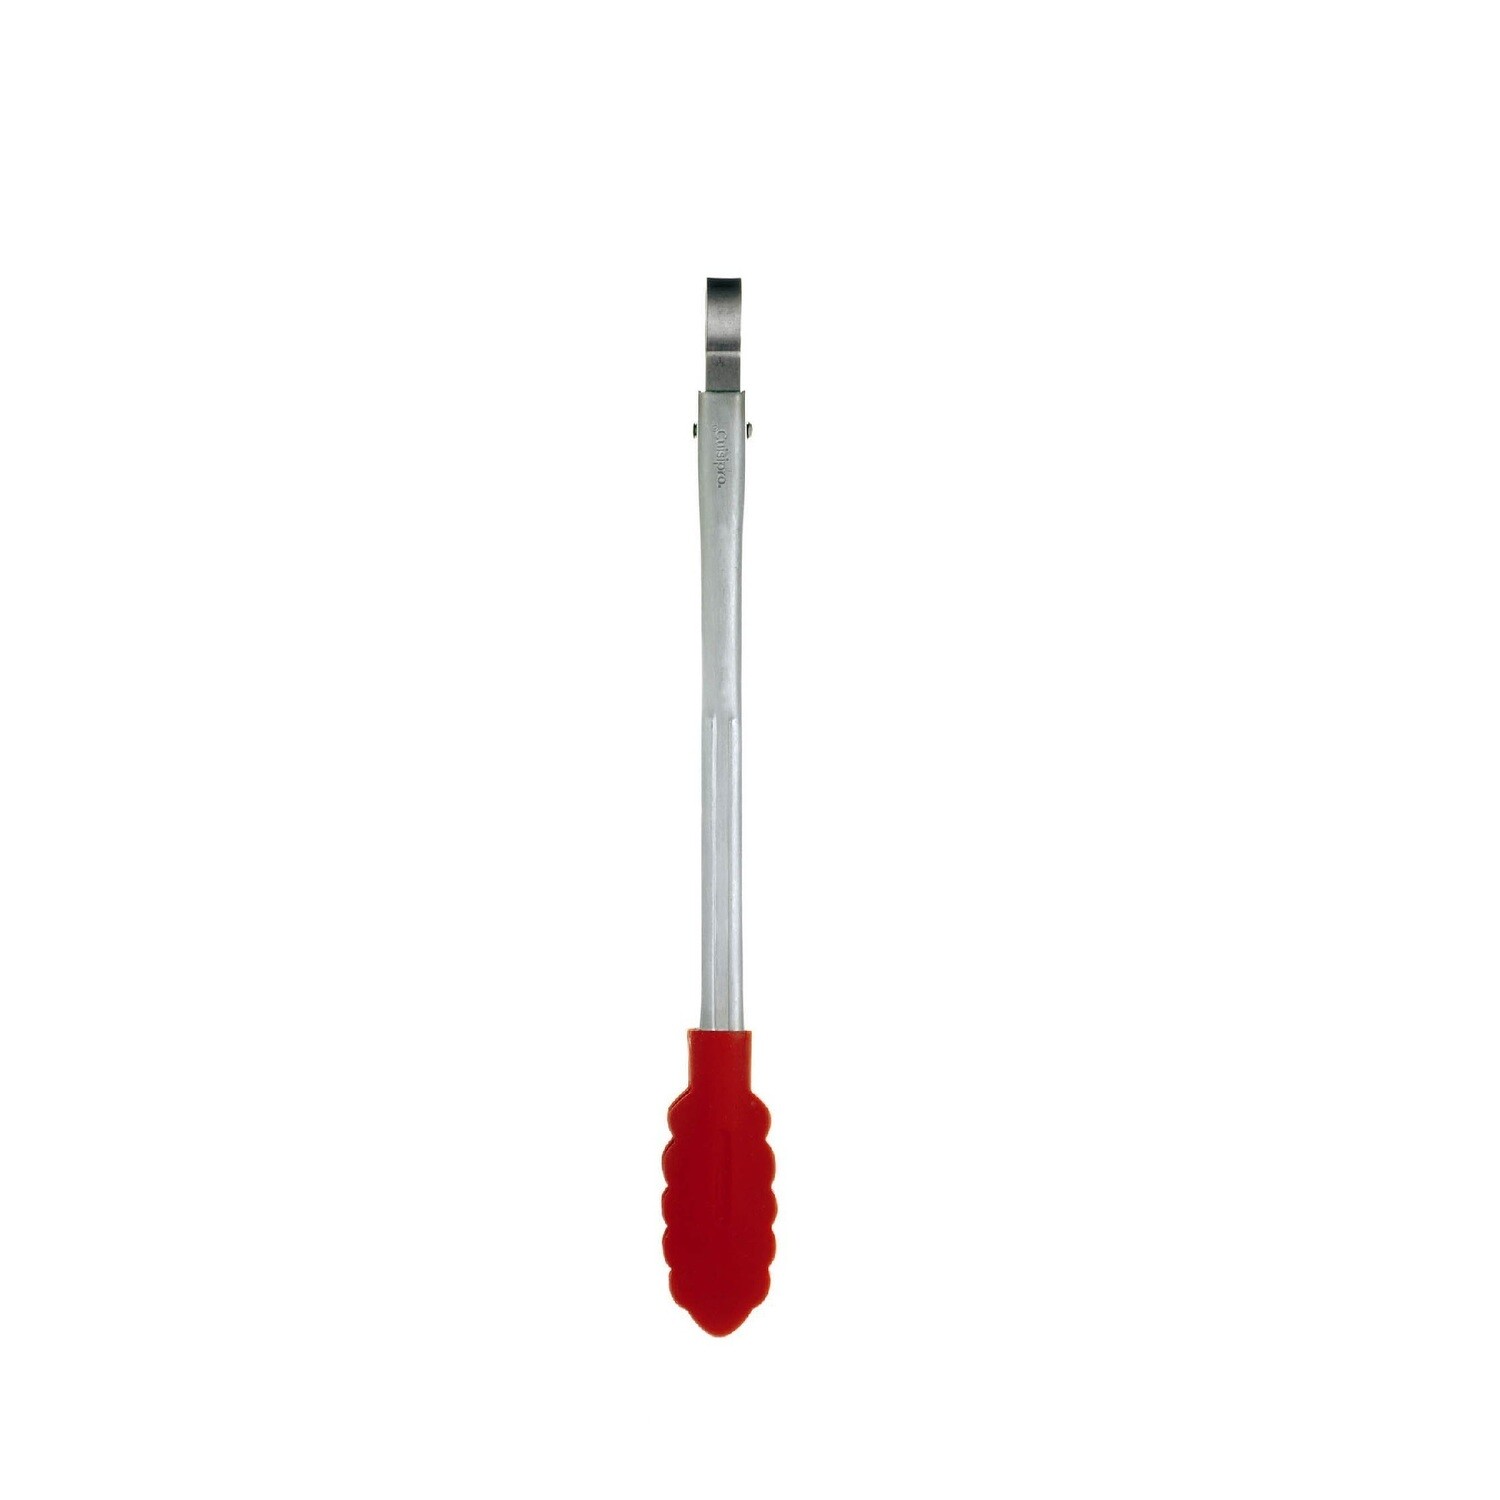 CUISIPRO 'silicone tools' serveertang 24cm rvs/silicone rood  PROMO 21,95 -20%